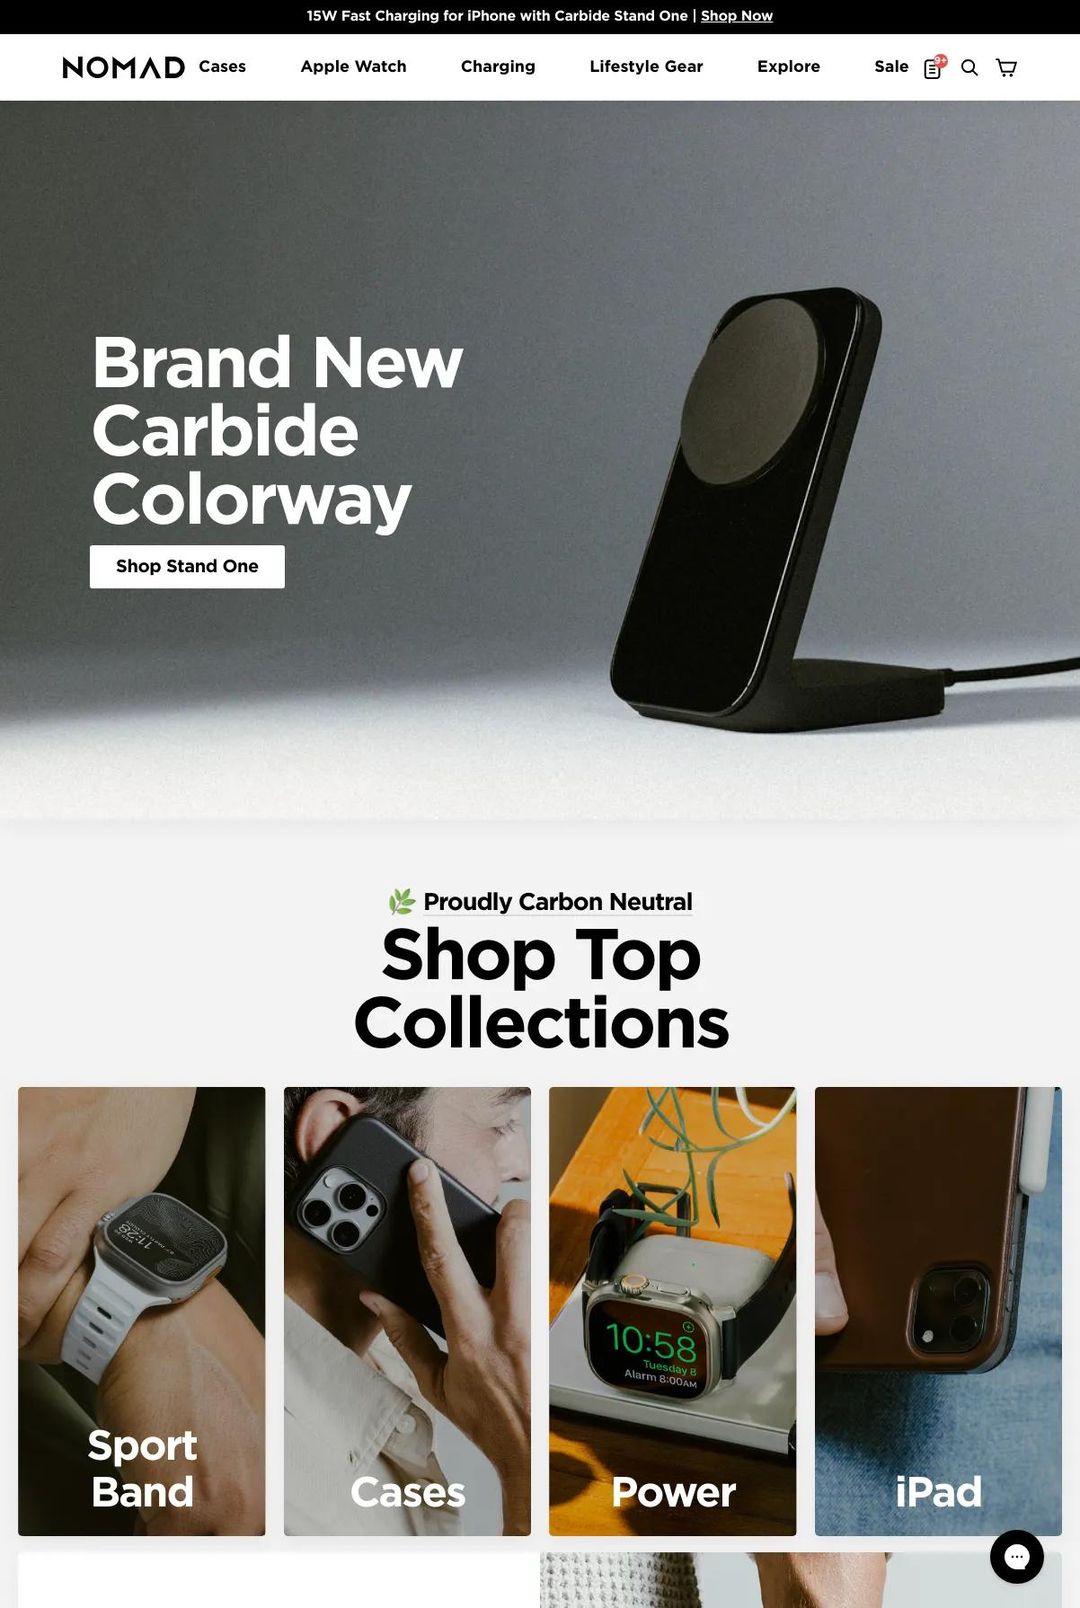 Screenshot 1 of Nomad Goods (Example Shopify Website)